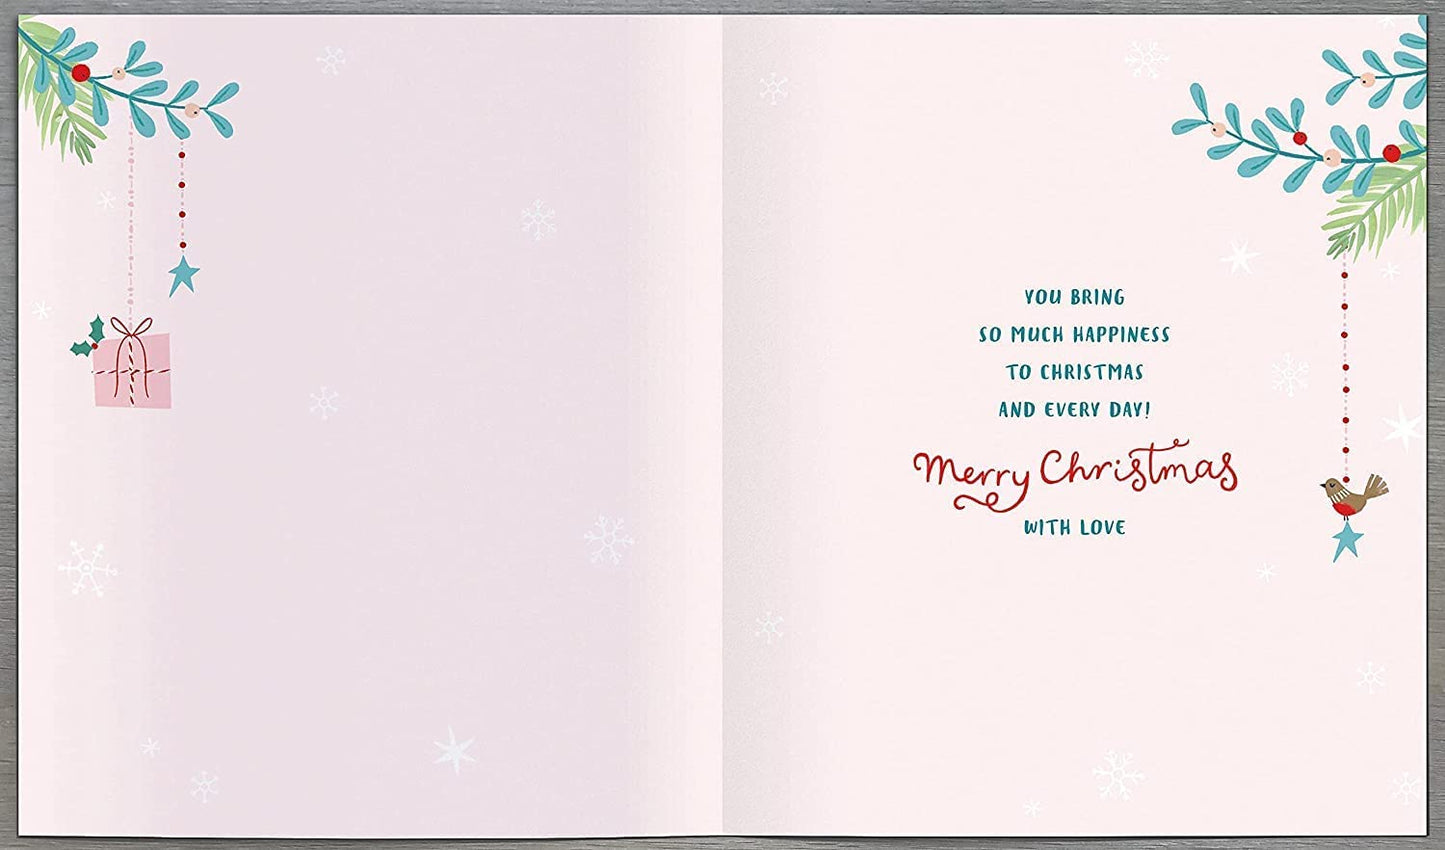 Nanny with Love Special Christmas Card Gifts Design